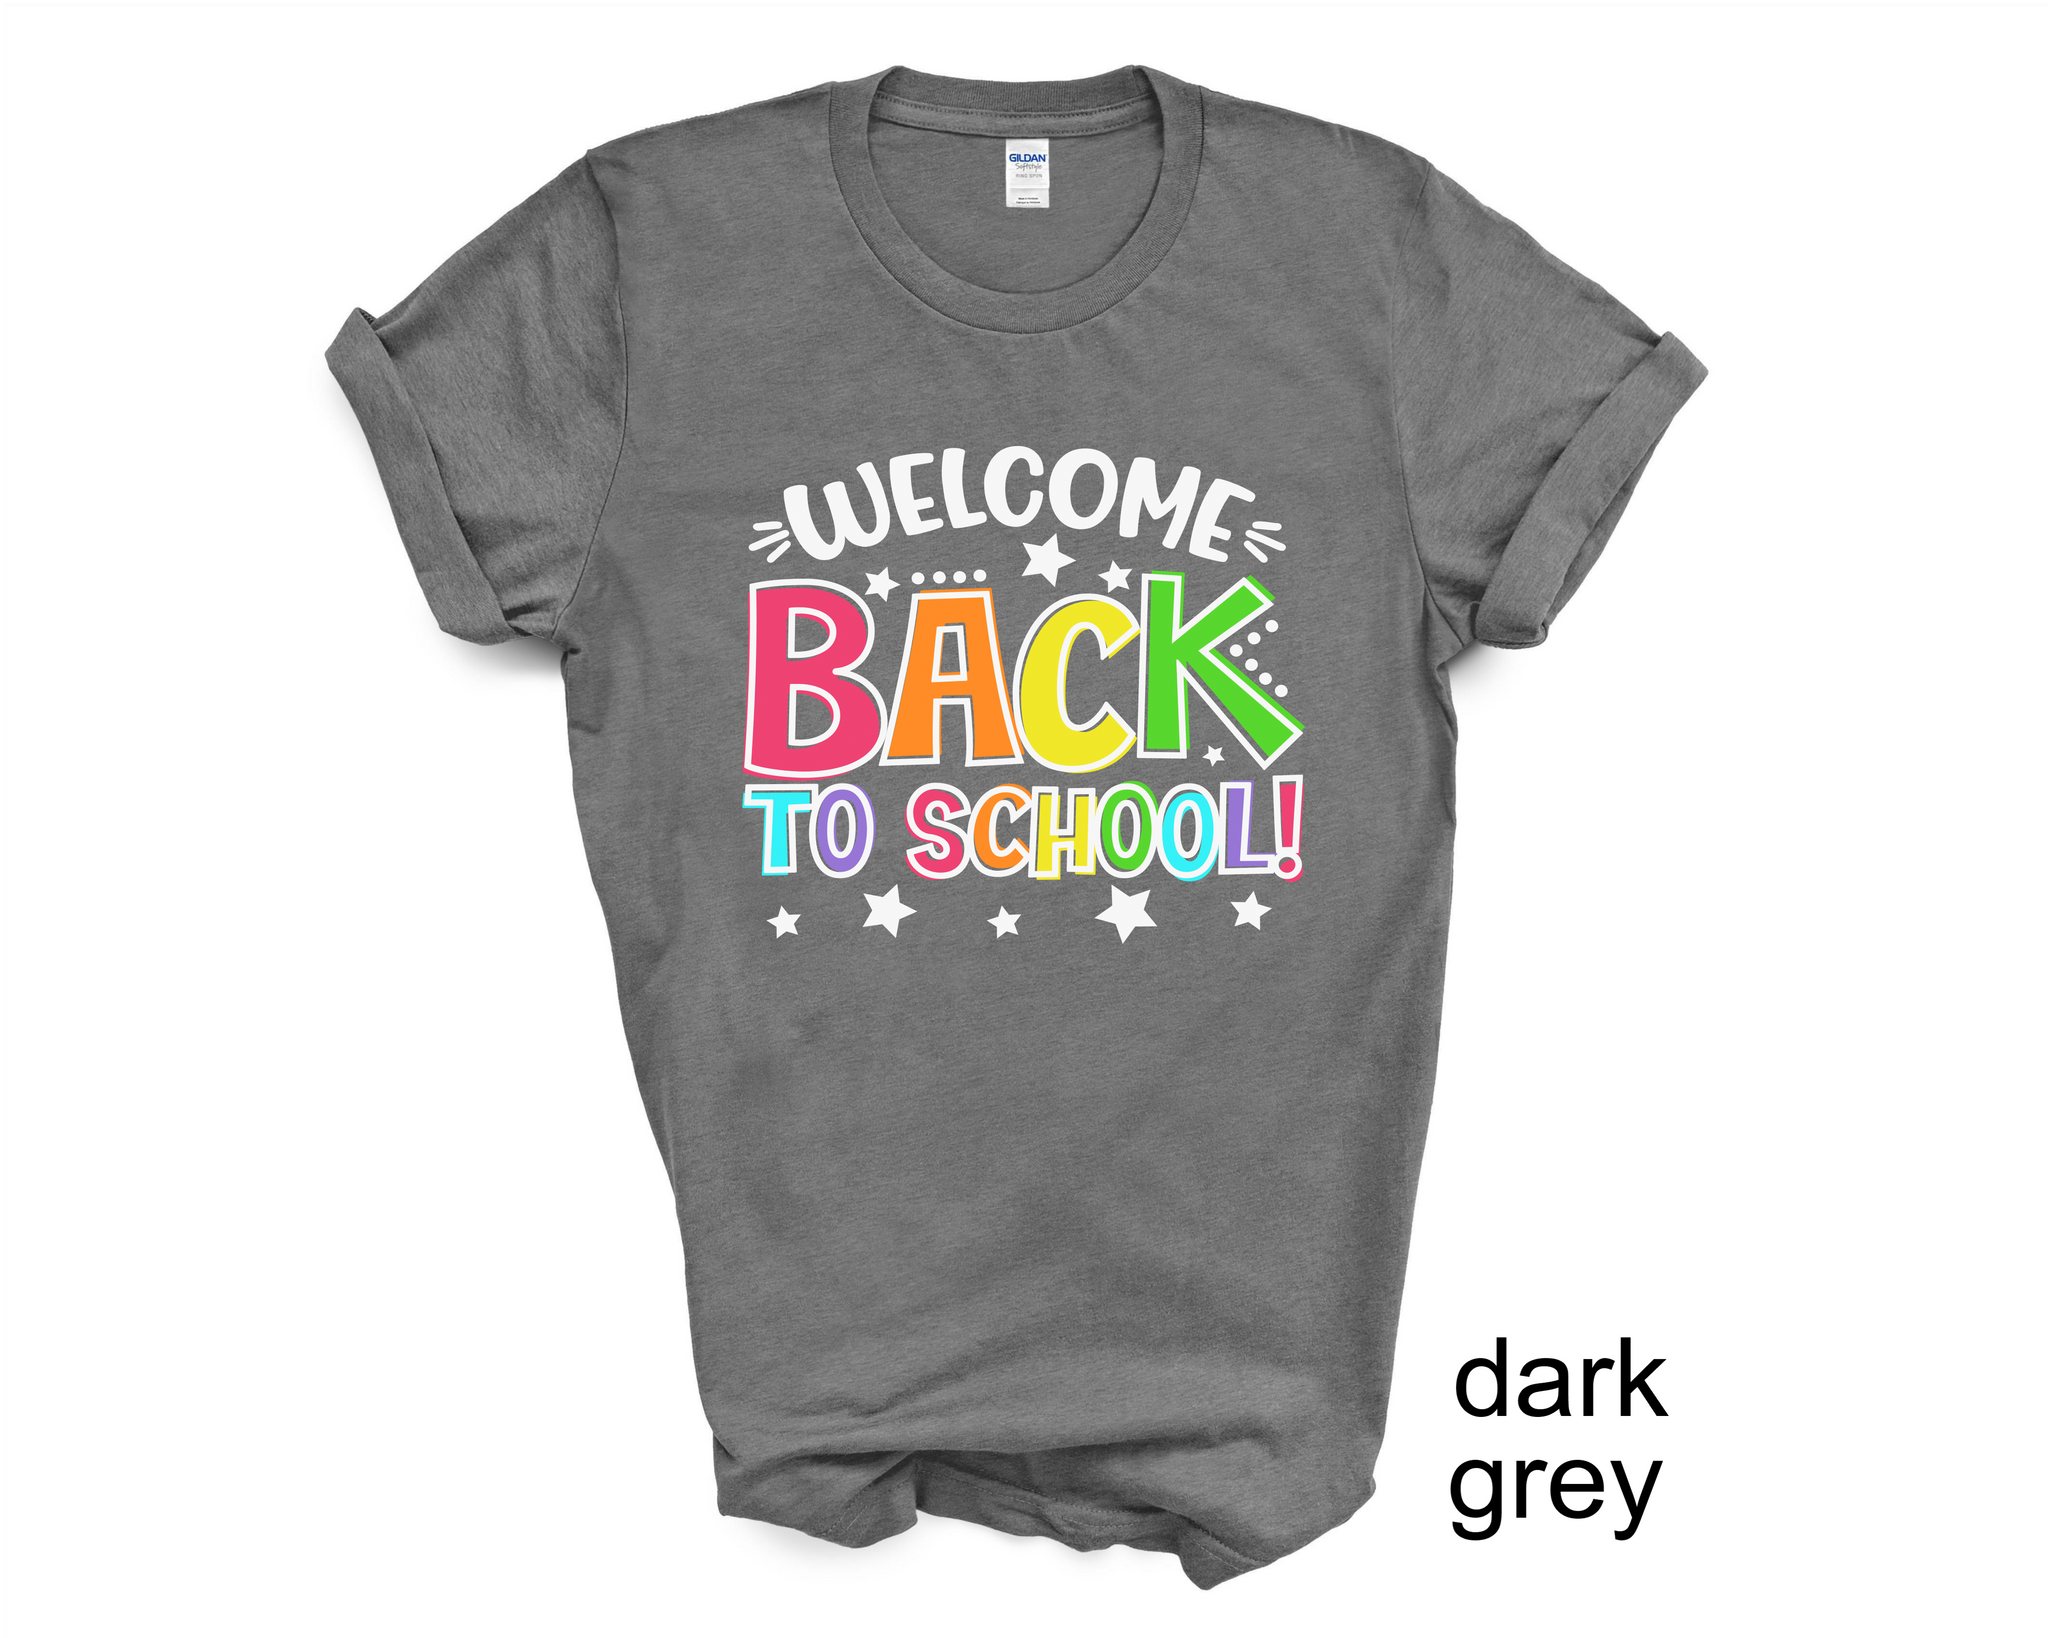 Welcome Back to School - Adult T-Shirt